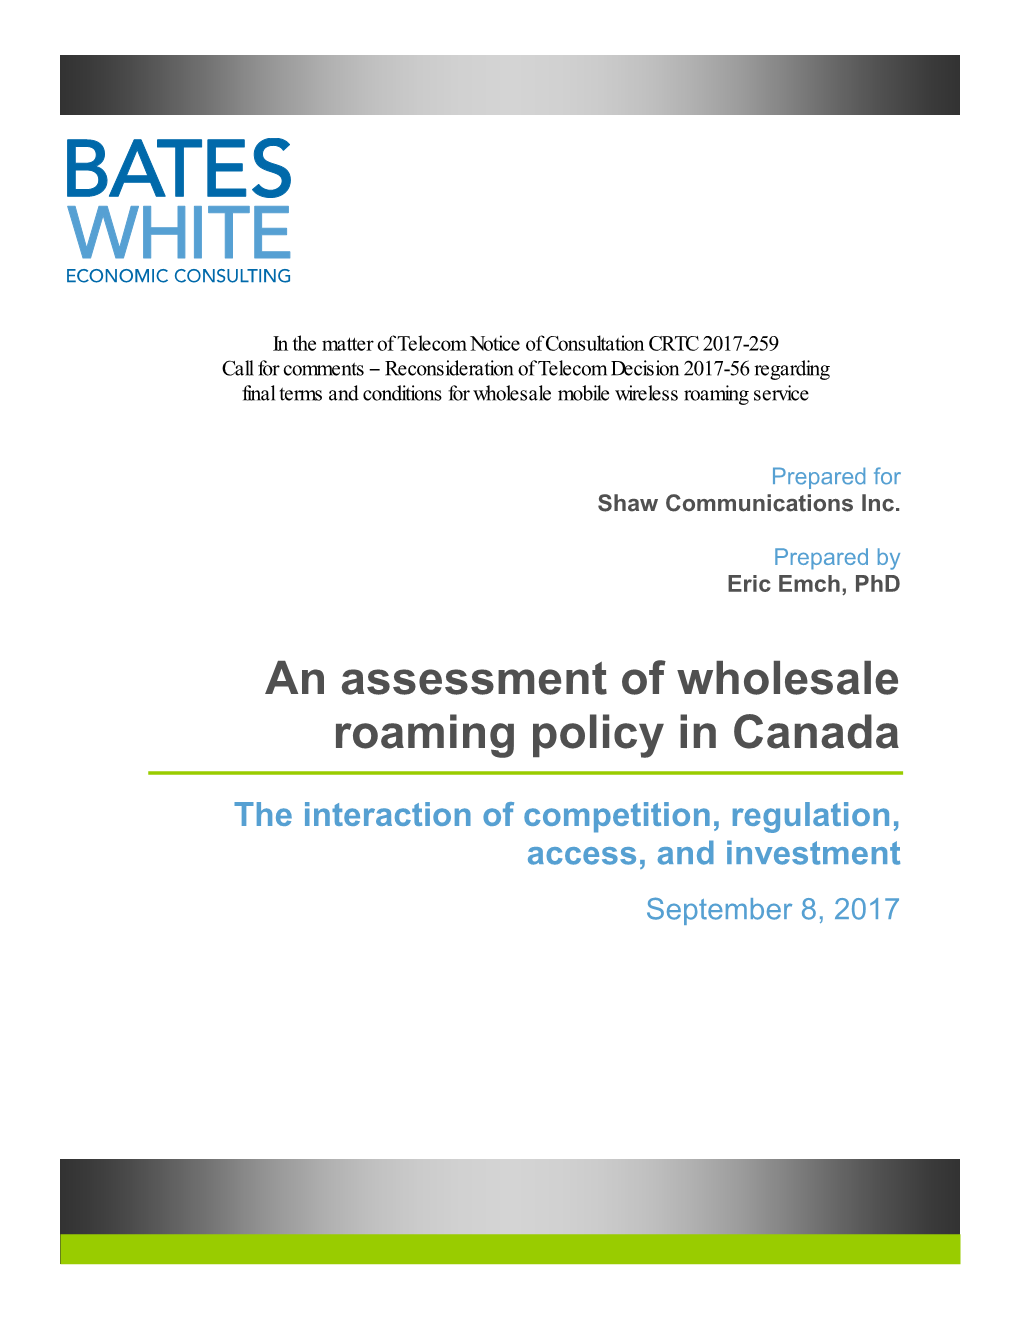 An Assessment of Wholesale Roaming Policy in Canada